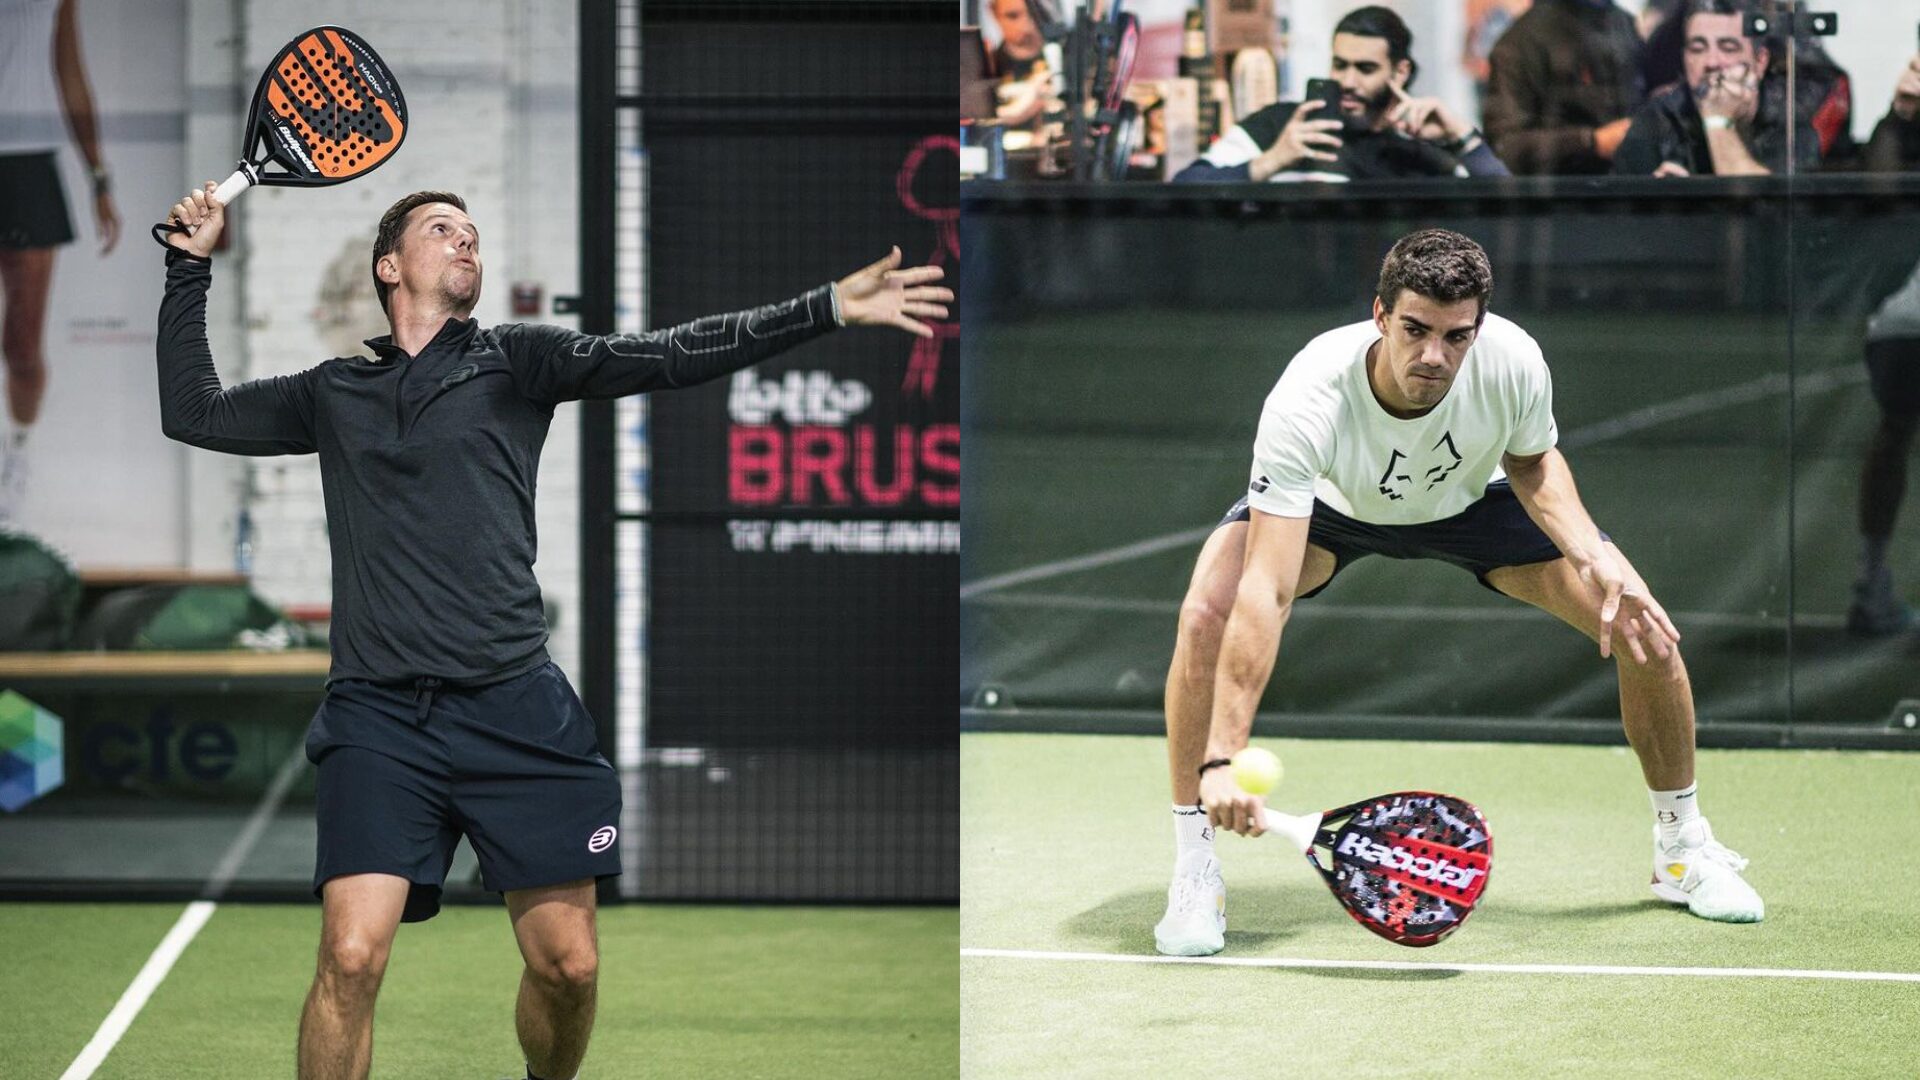 Premier Padel Brussels P2 – A first victory in the form of a comeback for Paquito and Lebron